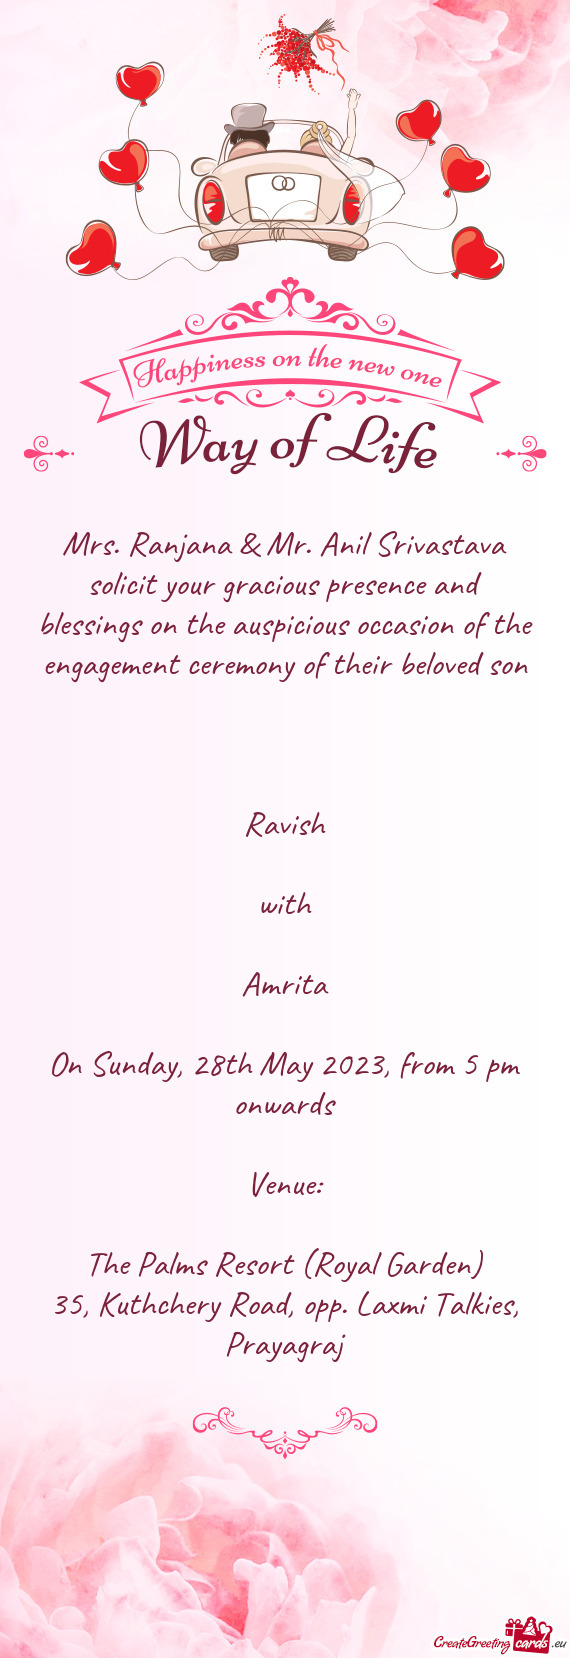 On Sunday, 28th May 2023, from 5 pm onwards